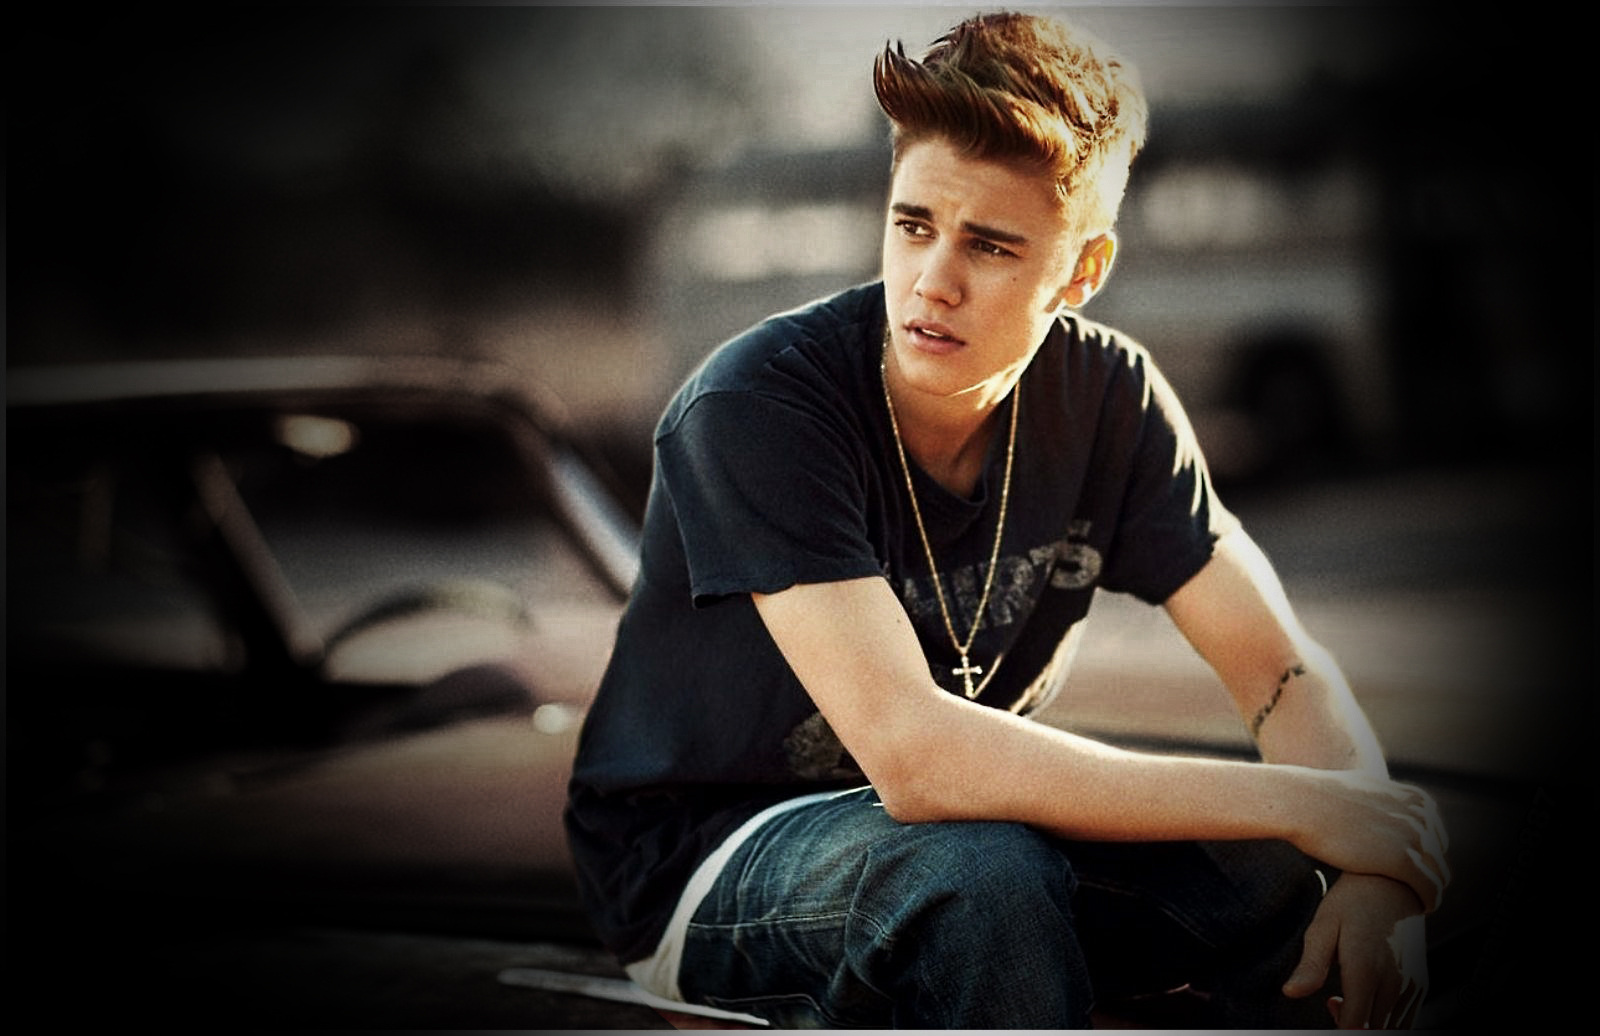 justin bieber new songs download